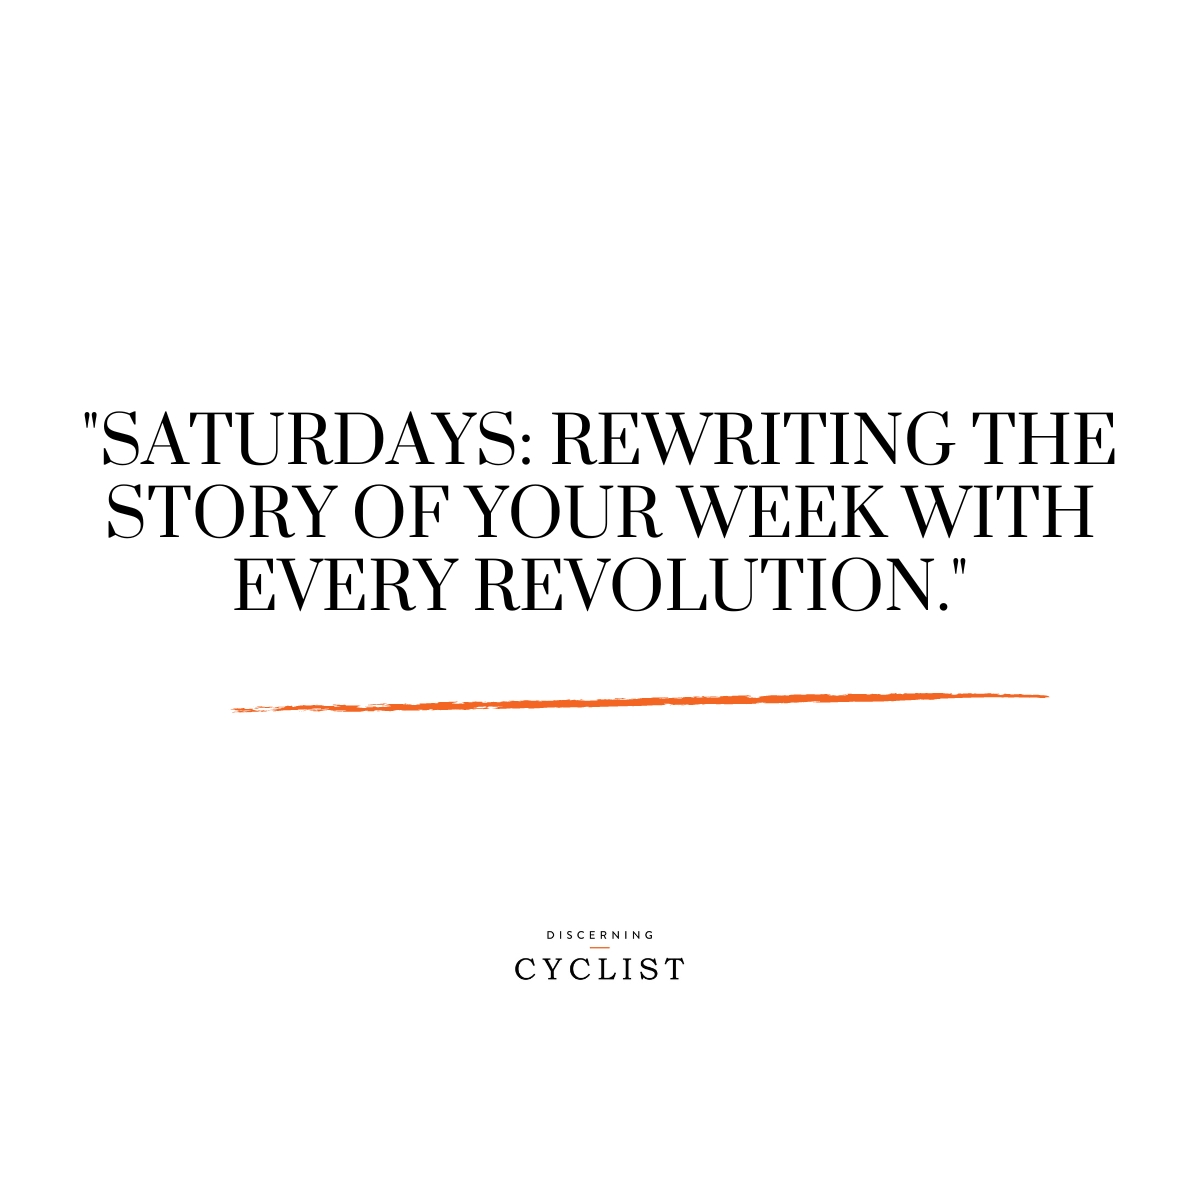 "Saturdays: rewriting the story of your week with every revolution."